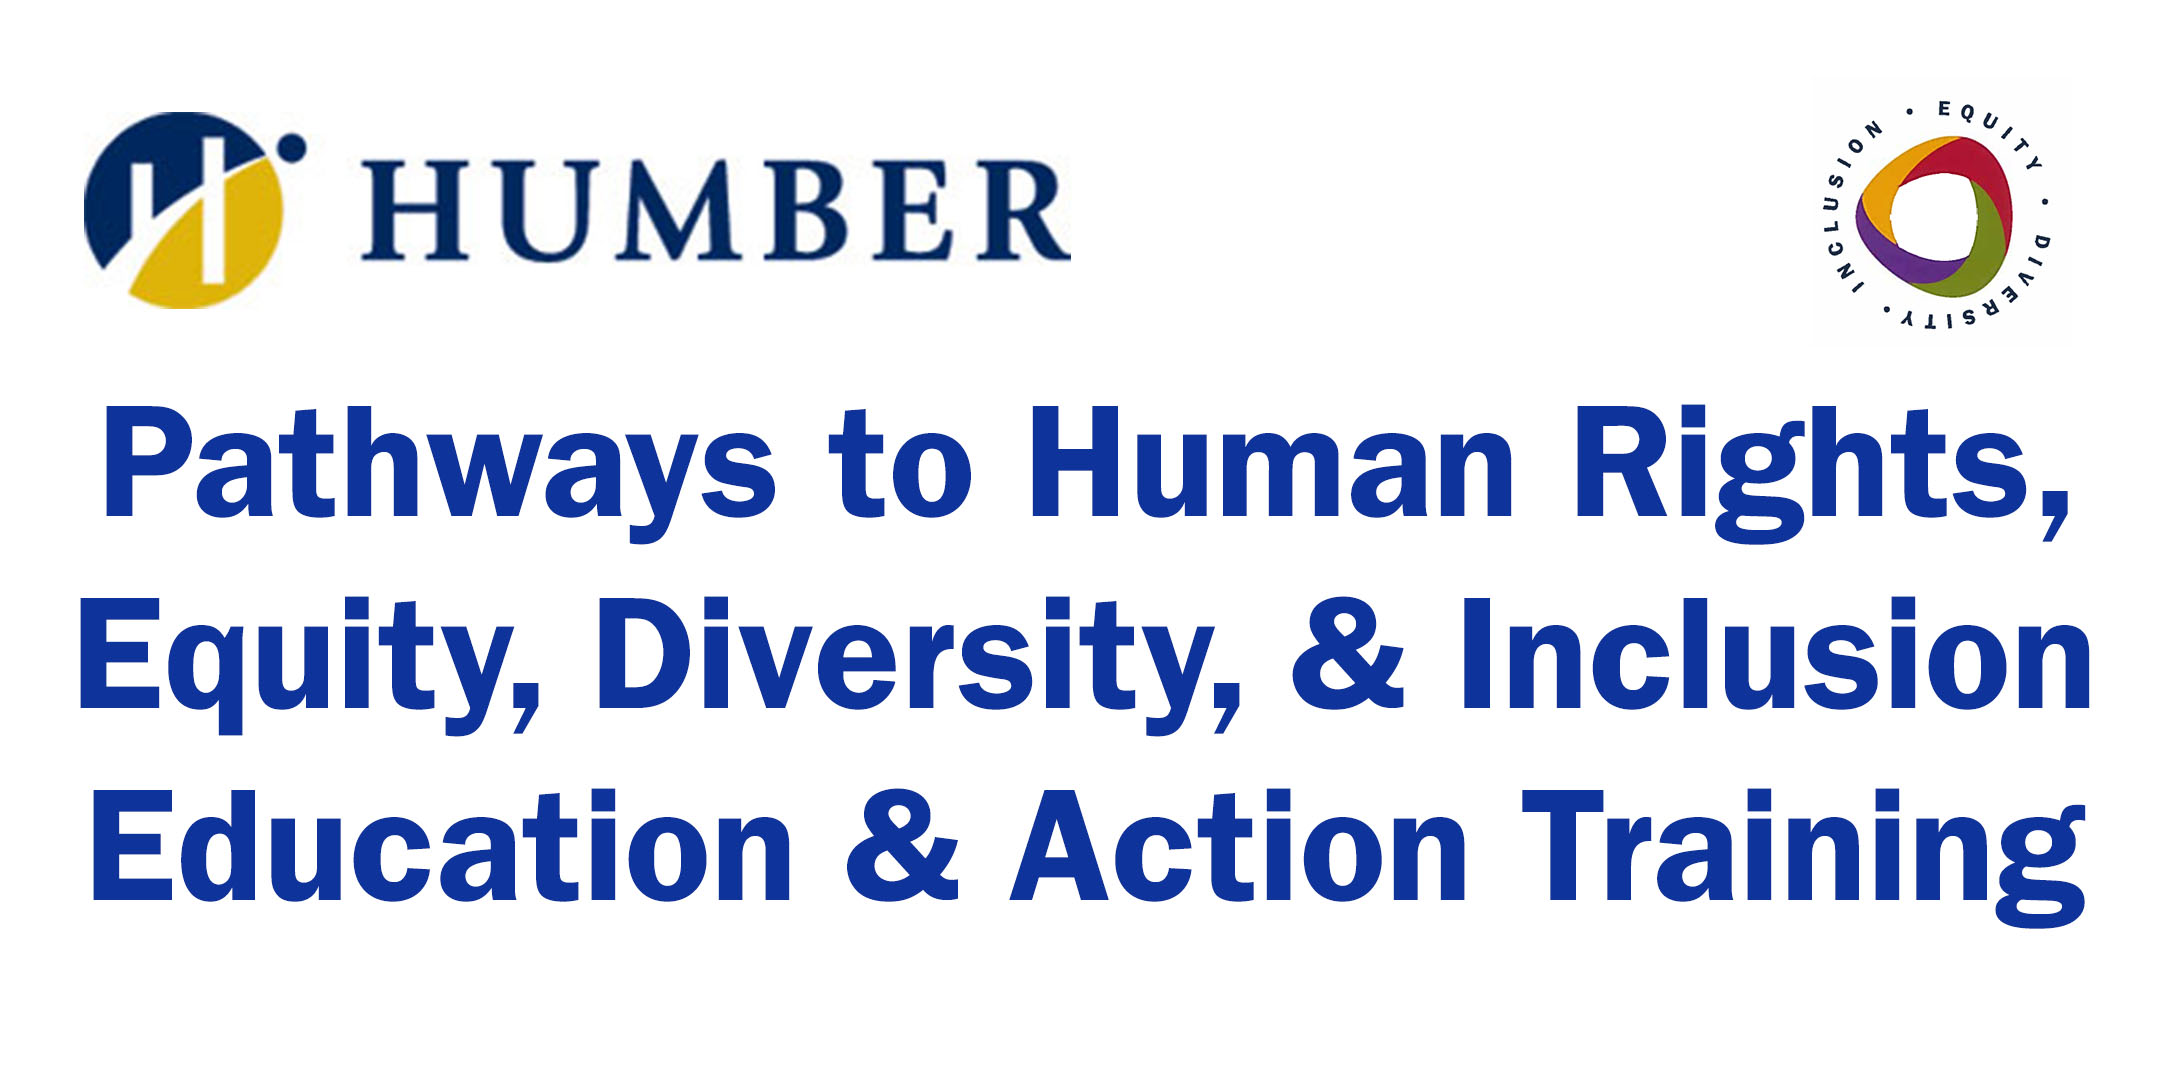 Pathways to Human Rights, Equity, Diversity, & Inclusion Education & Action